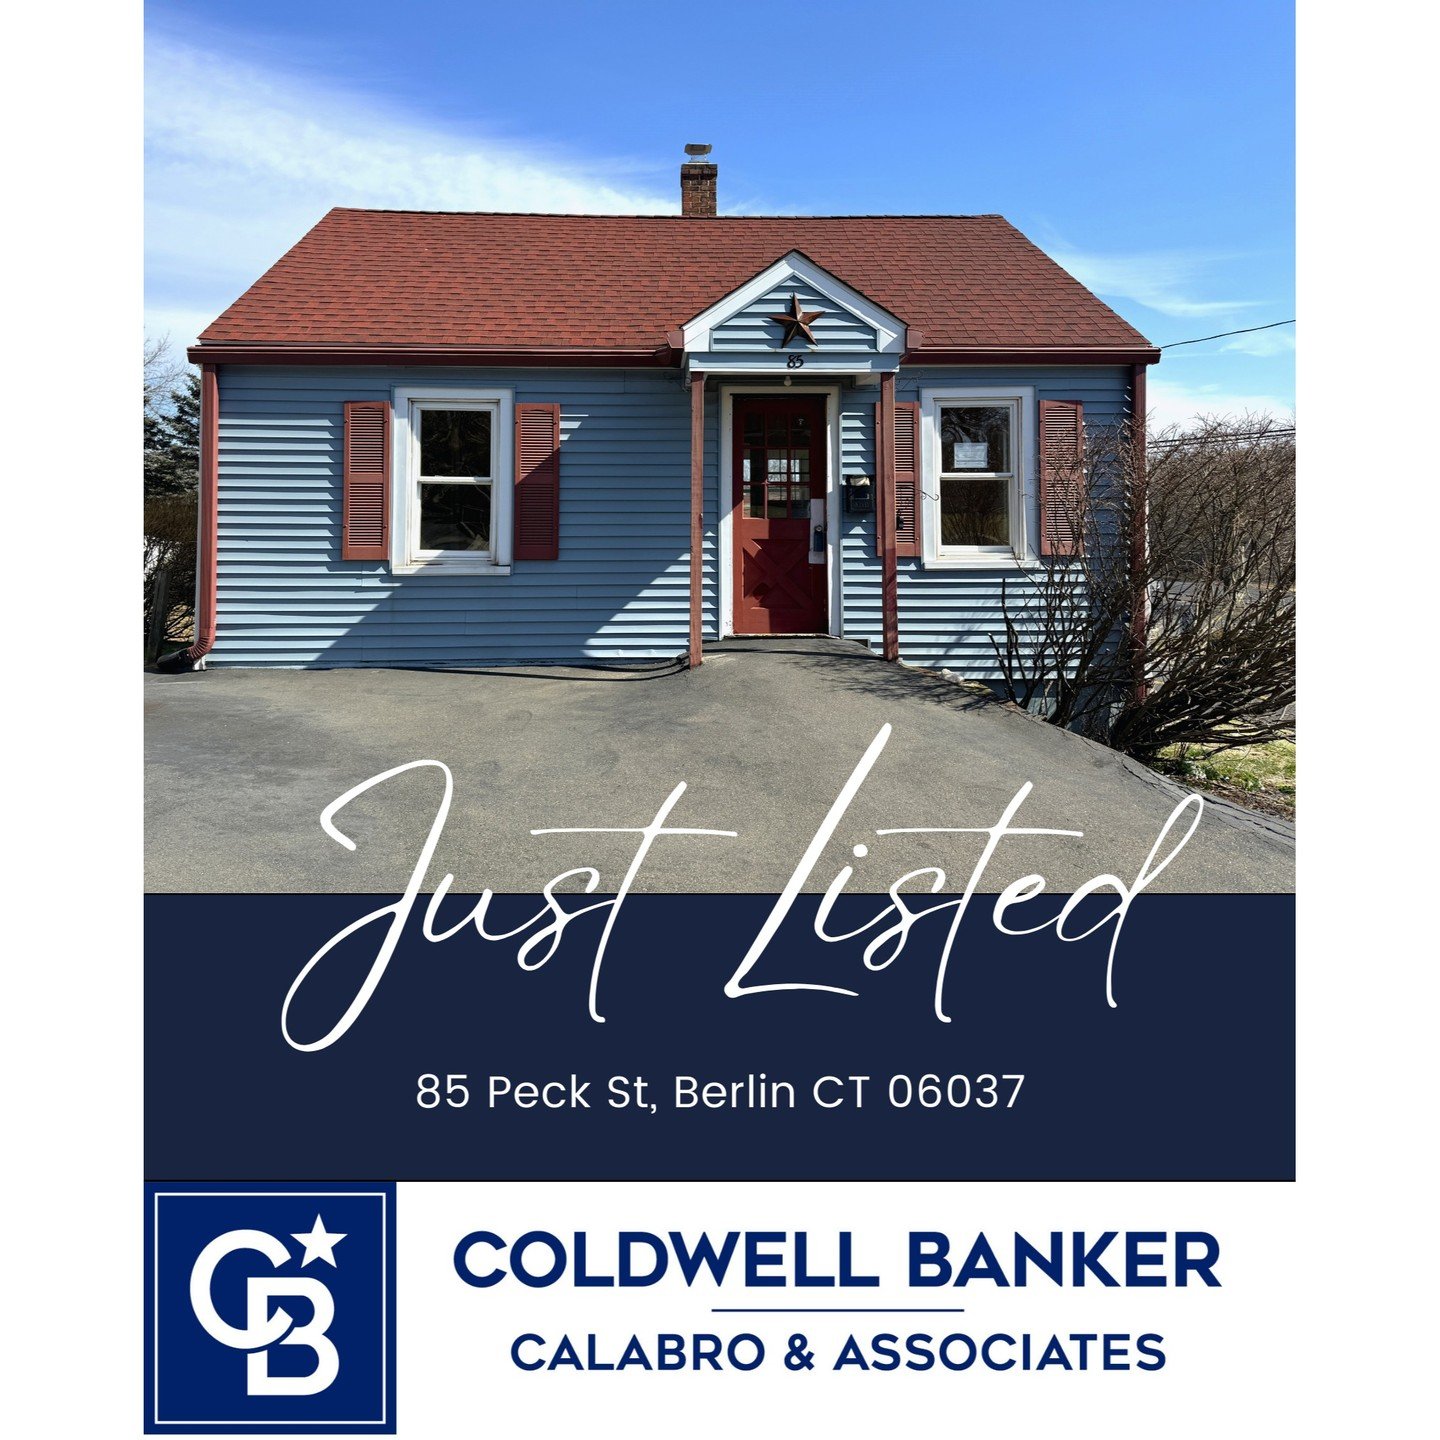 Just listed! Single family home for sale, 
$174,900. 🏡❤️

85 Peck St, Berlin CT. This lovely ranch is a 4 room, 1 bedroom, 1 bathroom home. The primary bedroom has a walk in closet. Not to mention the gorgeous sun room!

Maintenance free vinyl sidin